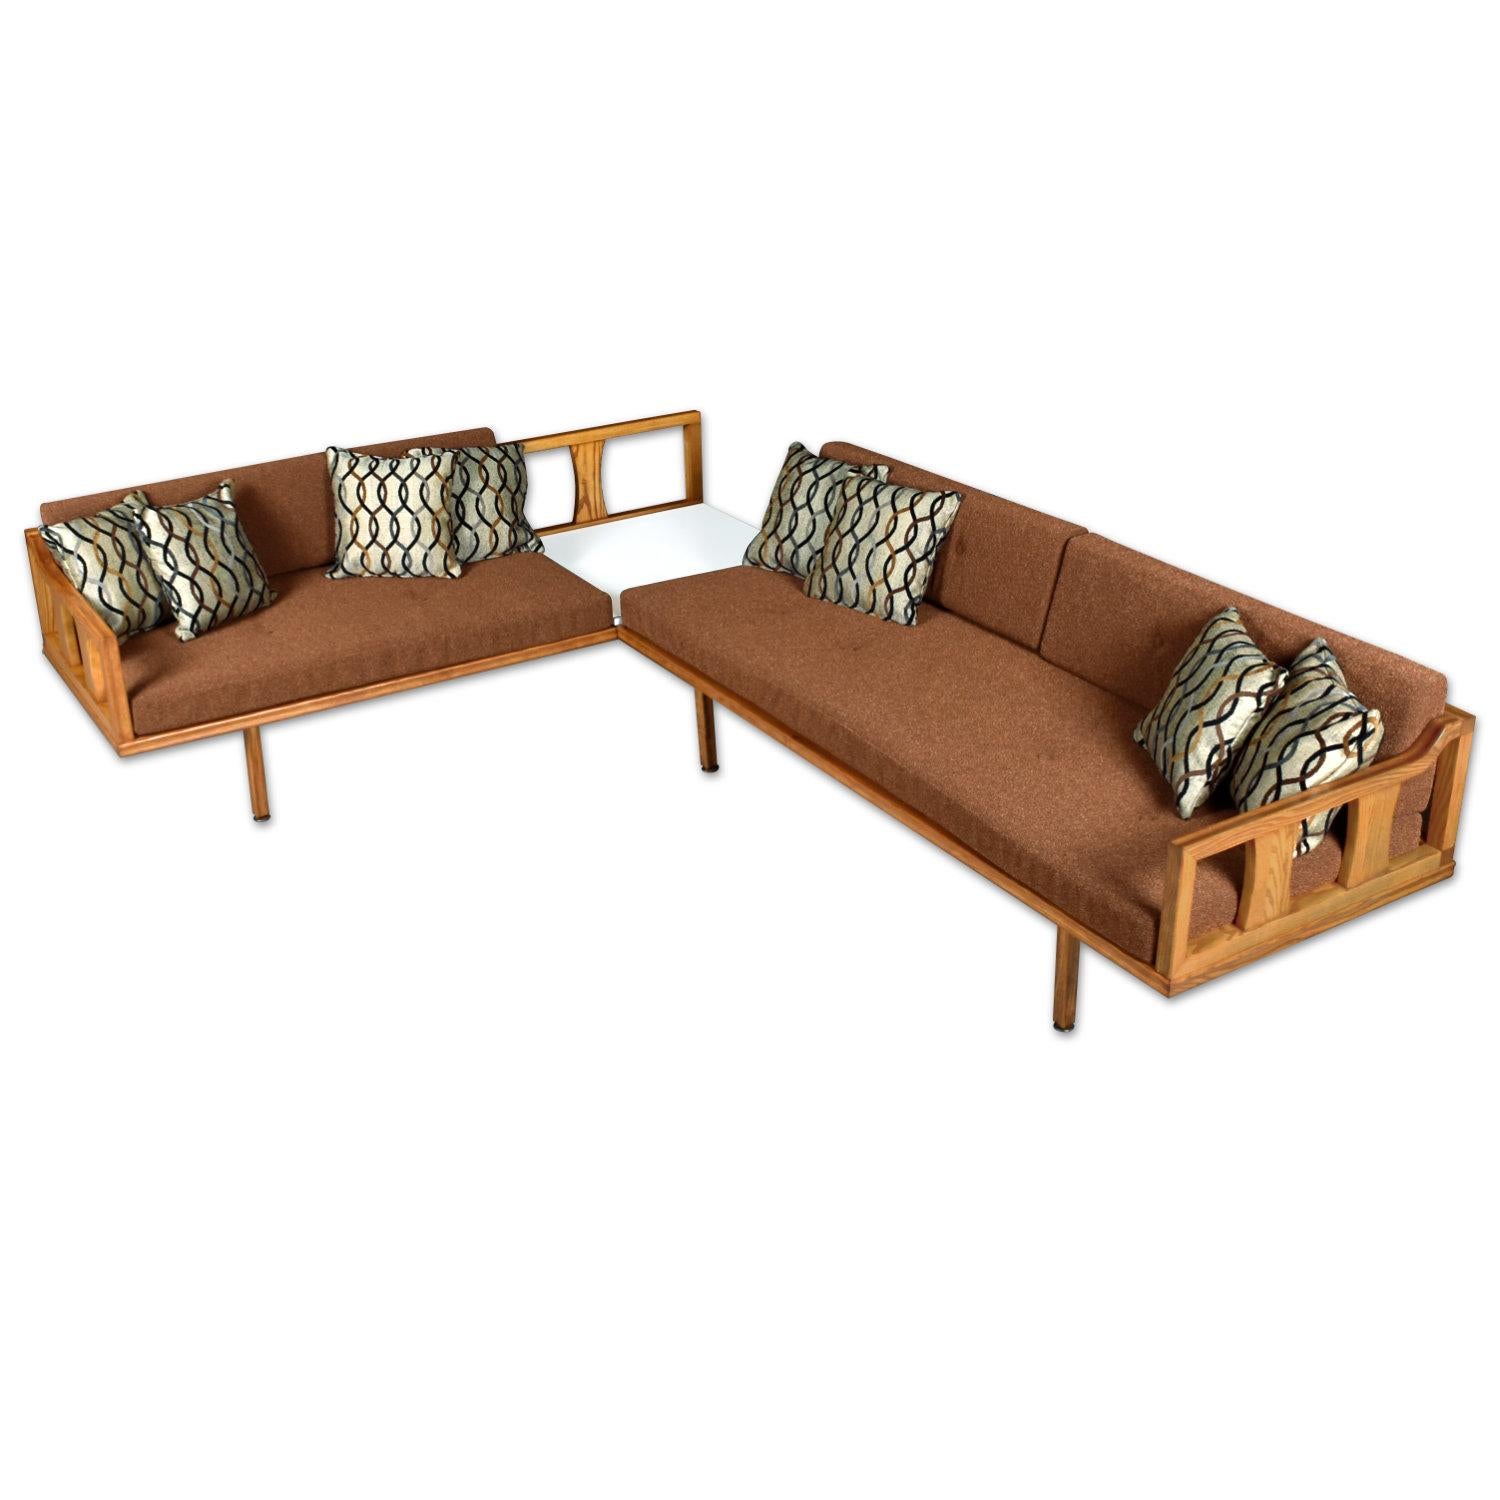 American Mid-Century Modern Oak Sectional Sofa Daybed with Reversible End Table